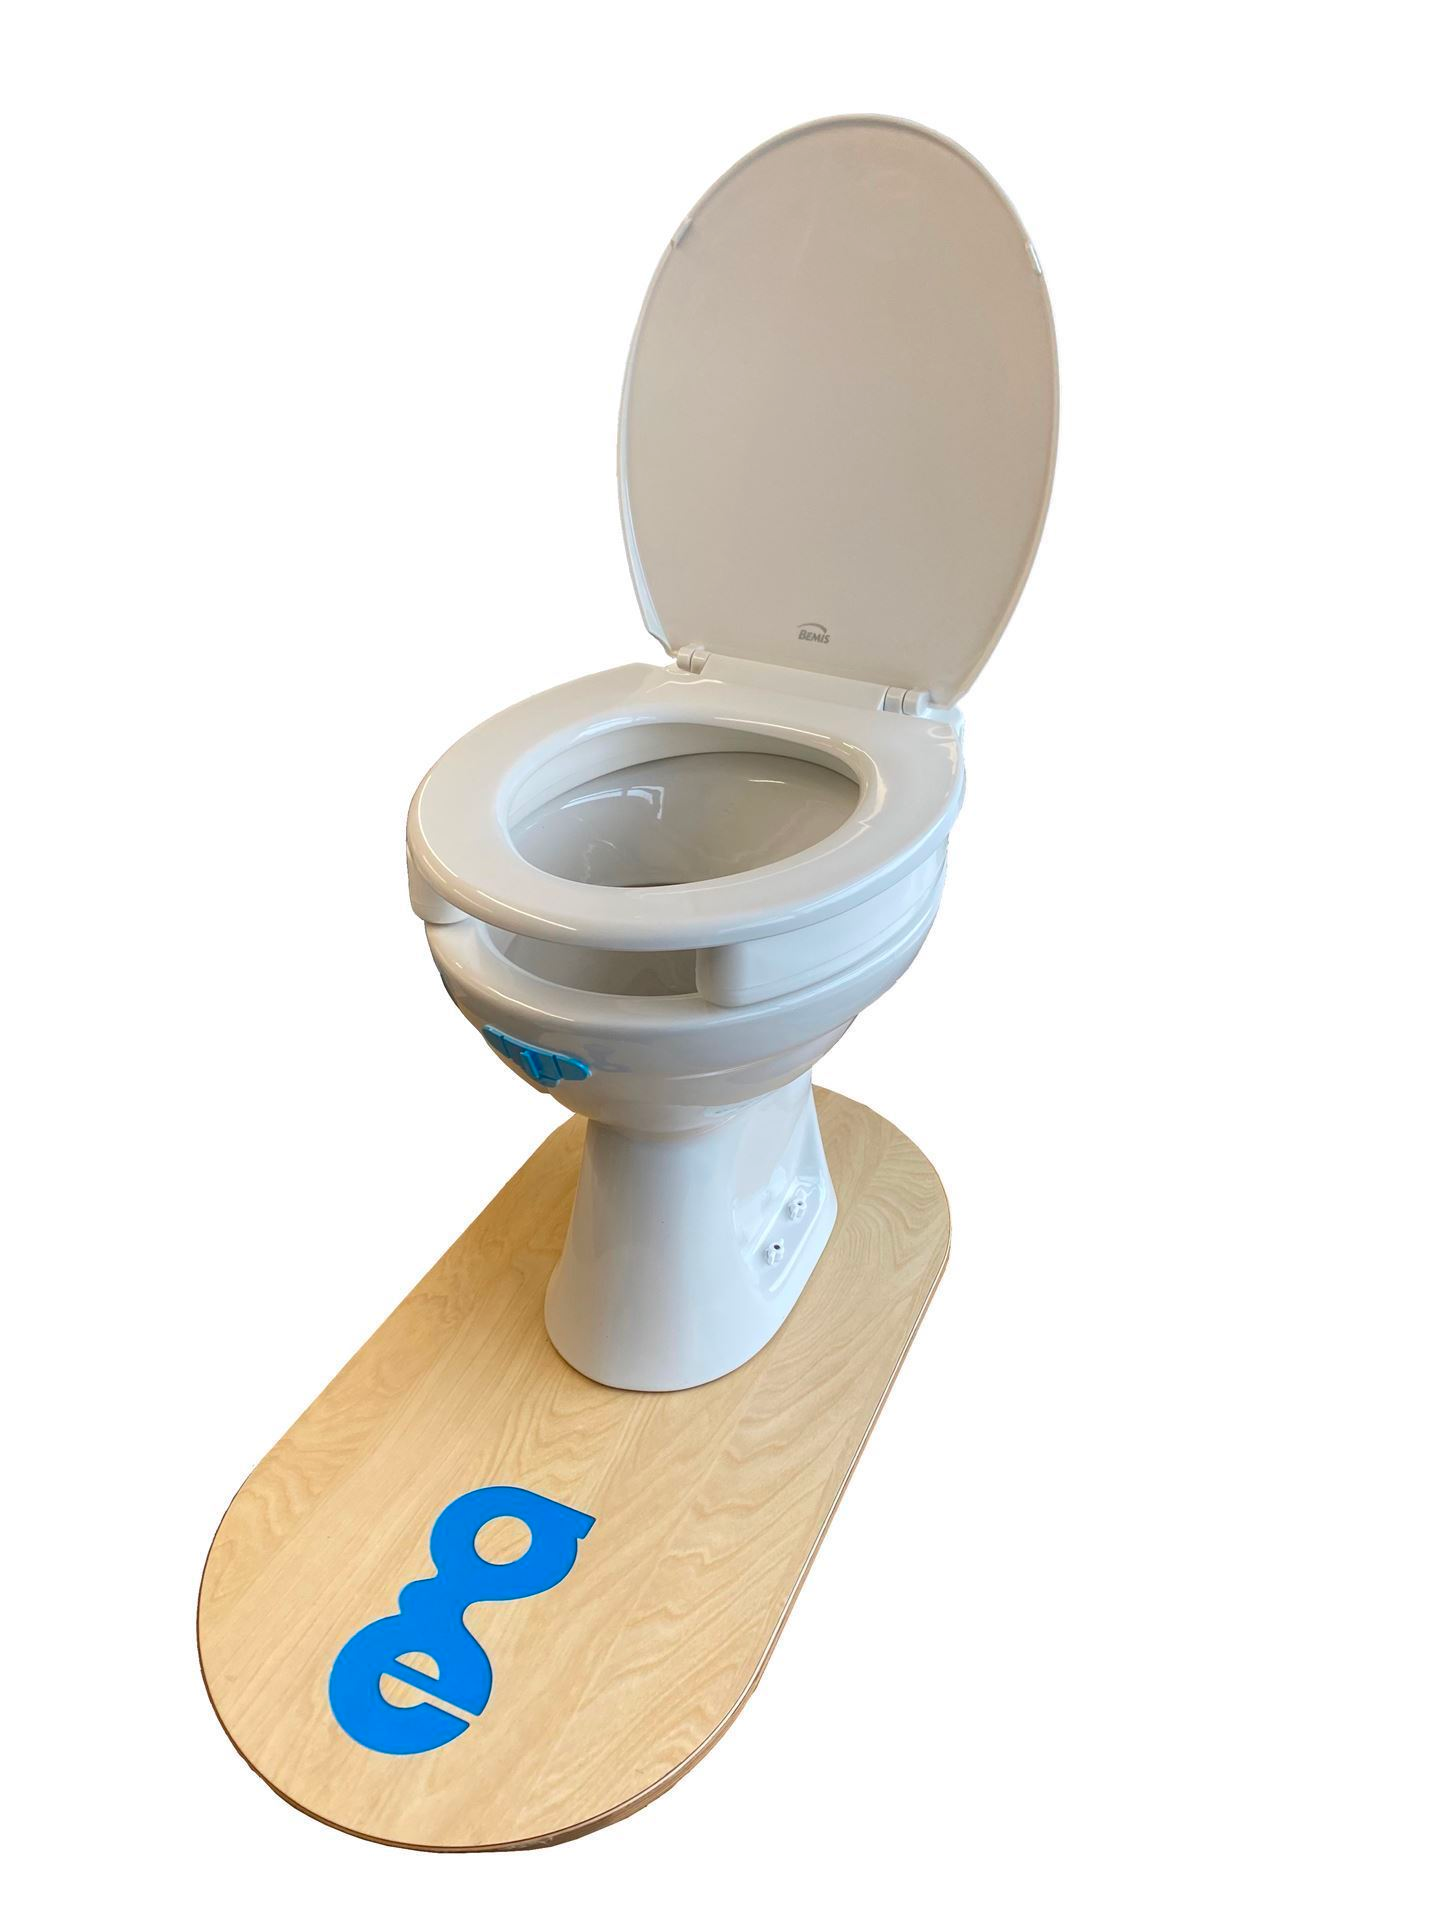 Toilet Seat Raiser 2" that fits under the existing seat it works with square and standard shaped toilets